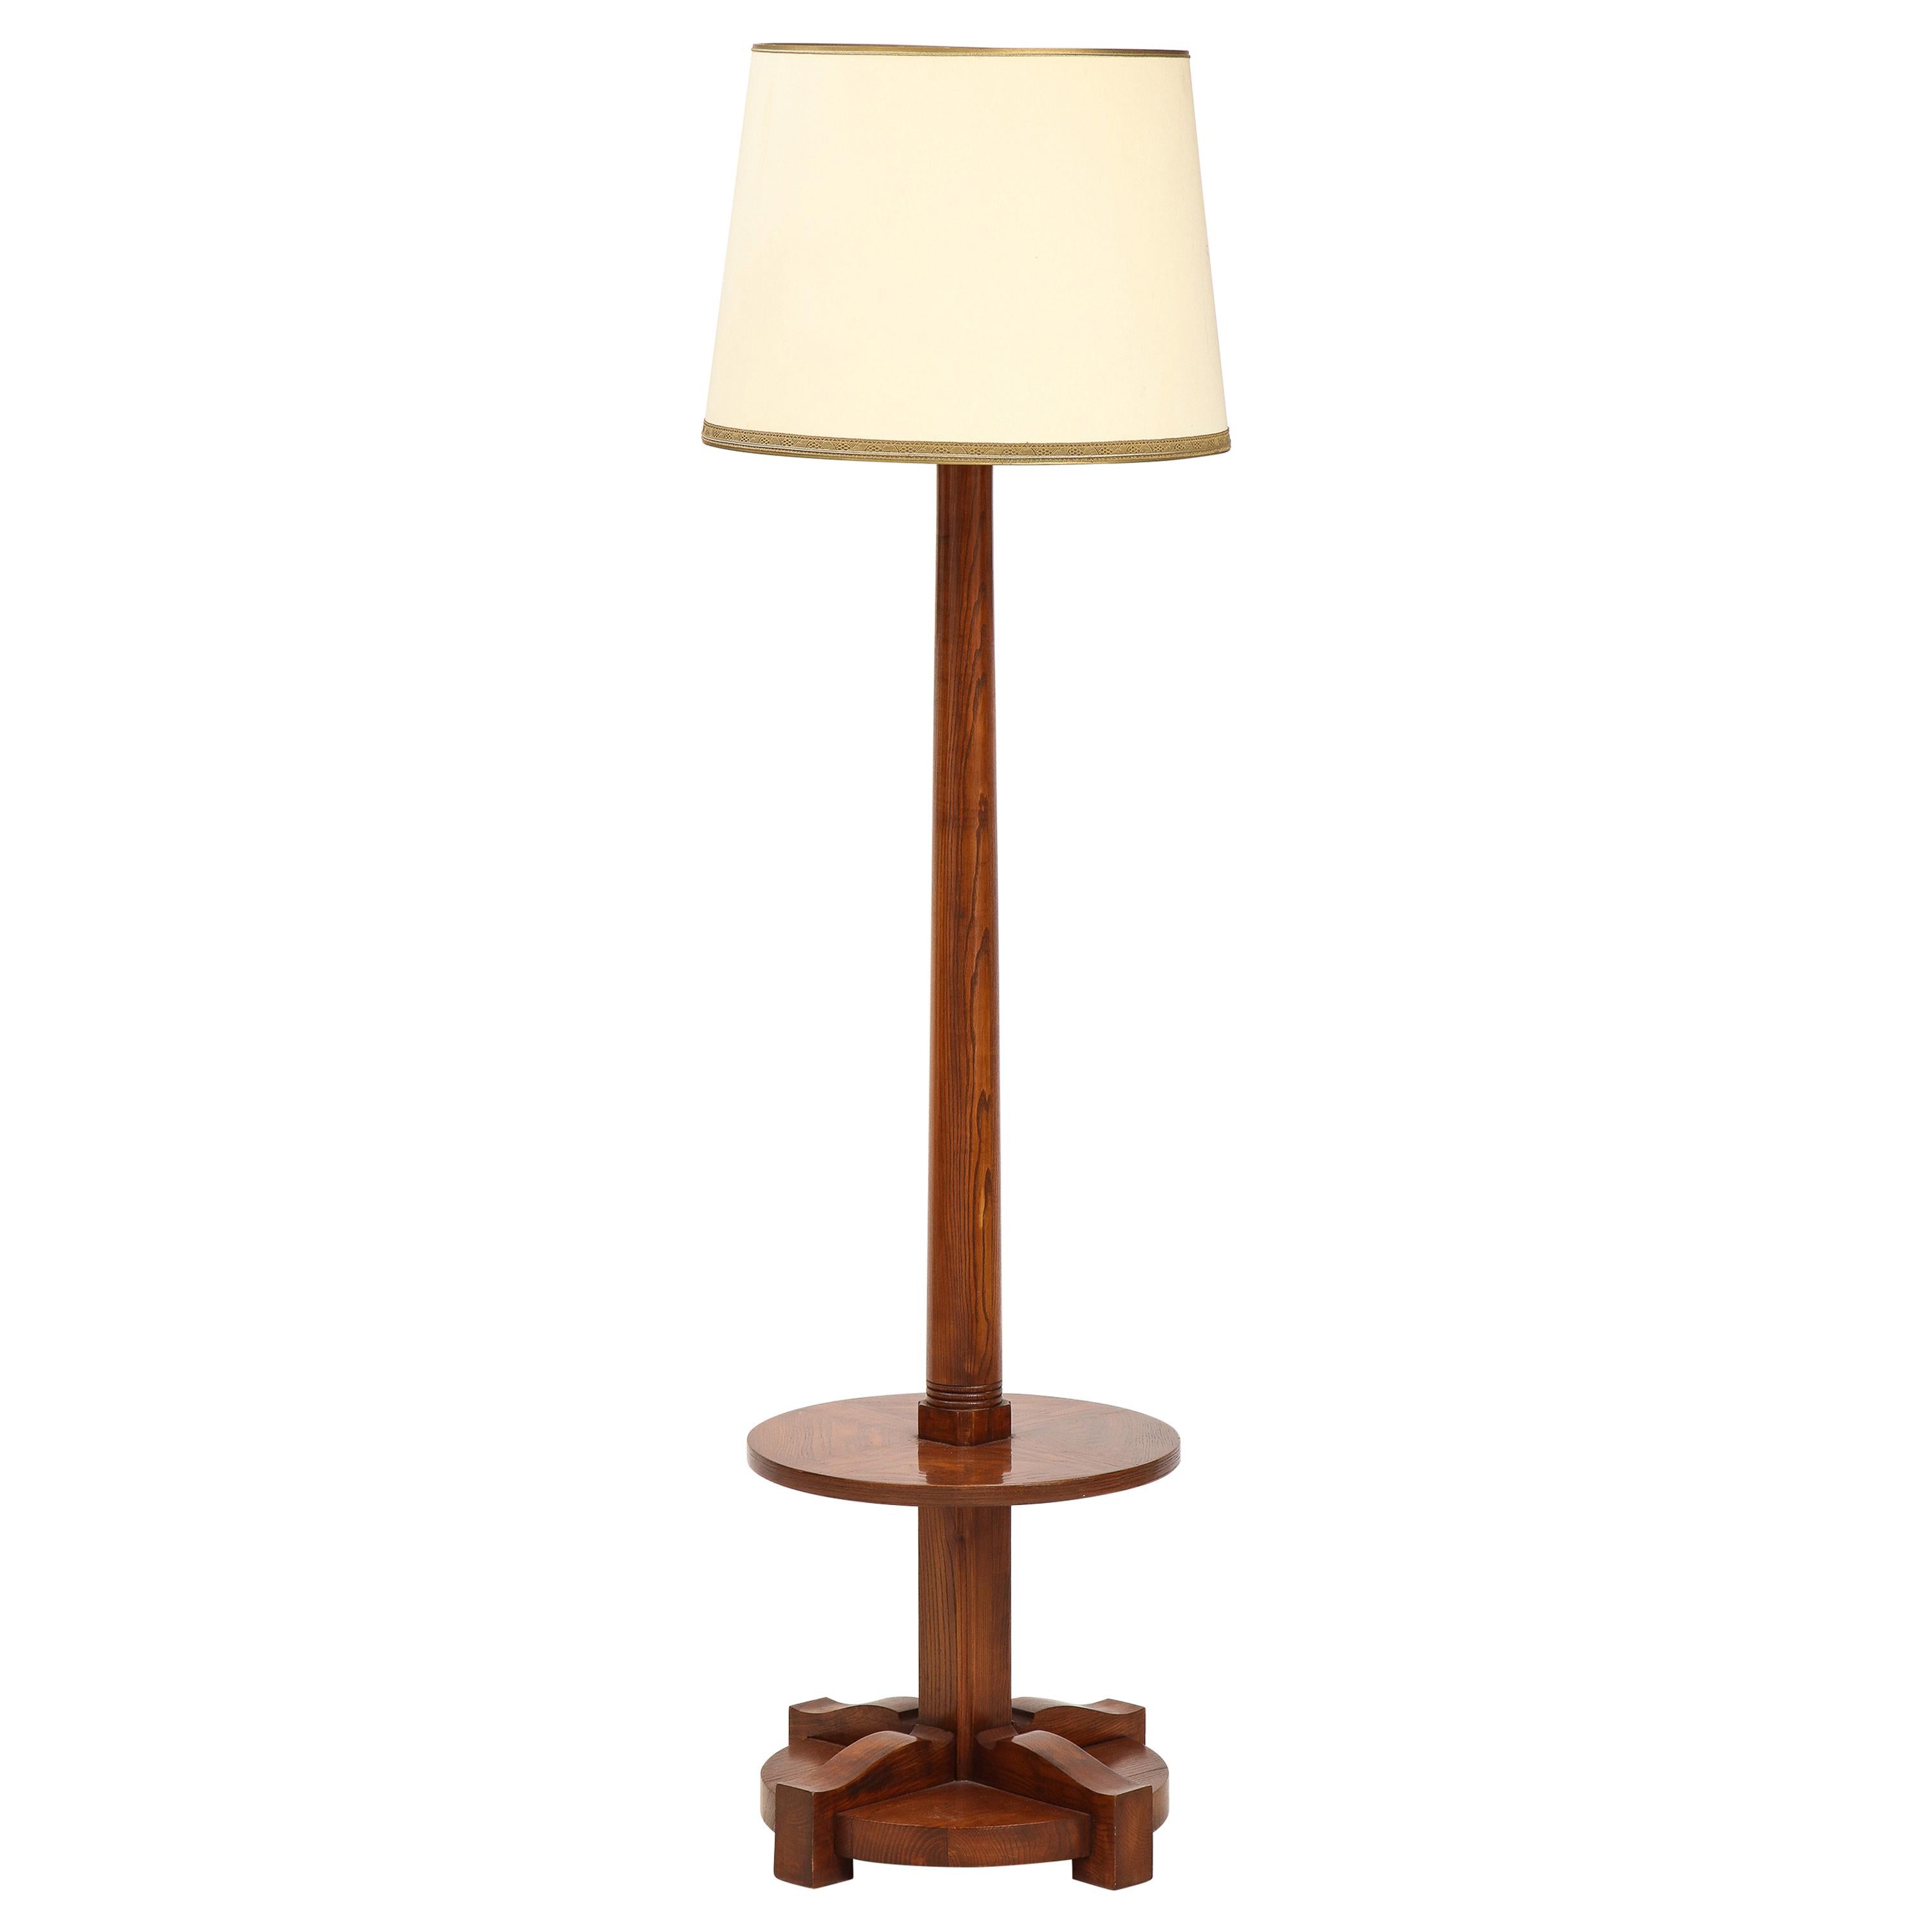 French Art Deco Elmwood Floor Lamp Gueridon in the Style of Maison Dominique